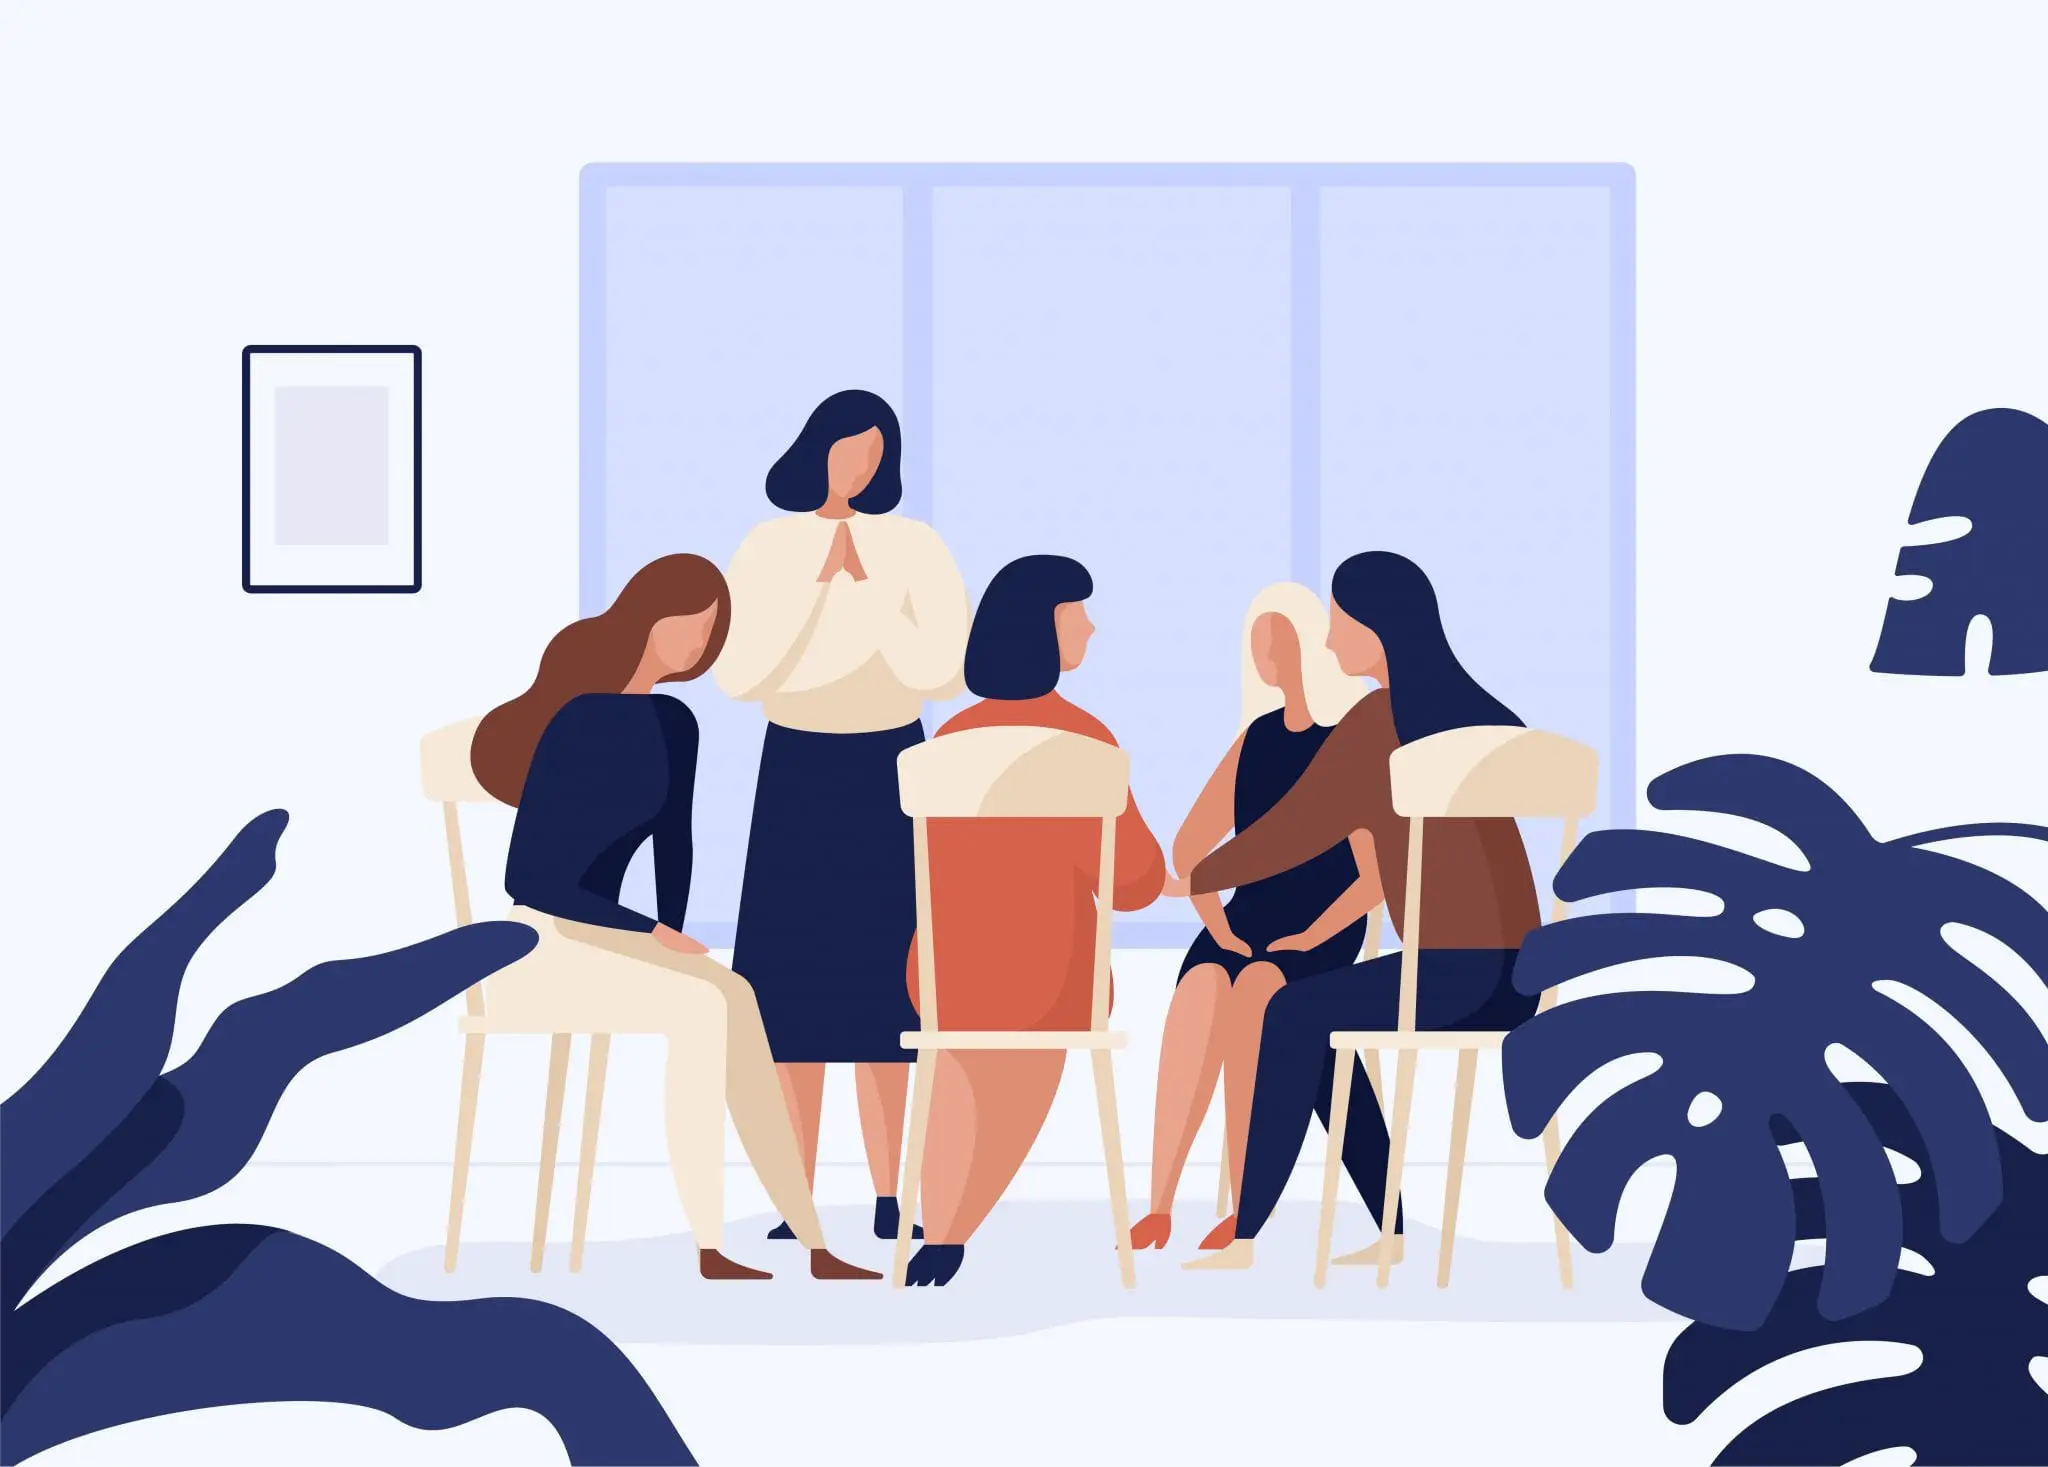 Female Characters Sitting on Chairs in Circle and Talking to Each Other. Group Therapy, Psychotherapeutic Meeting or Psychological Aid for Women.